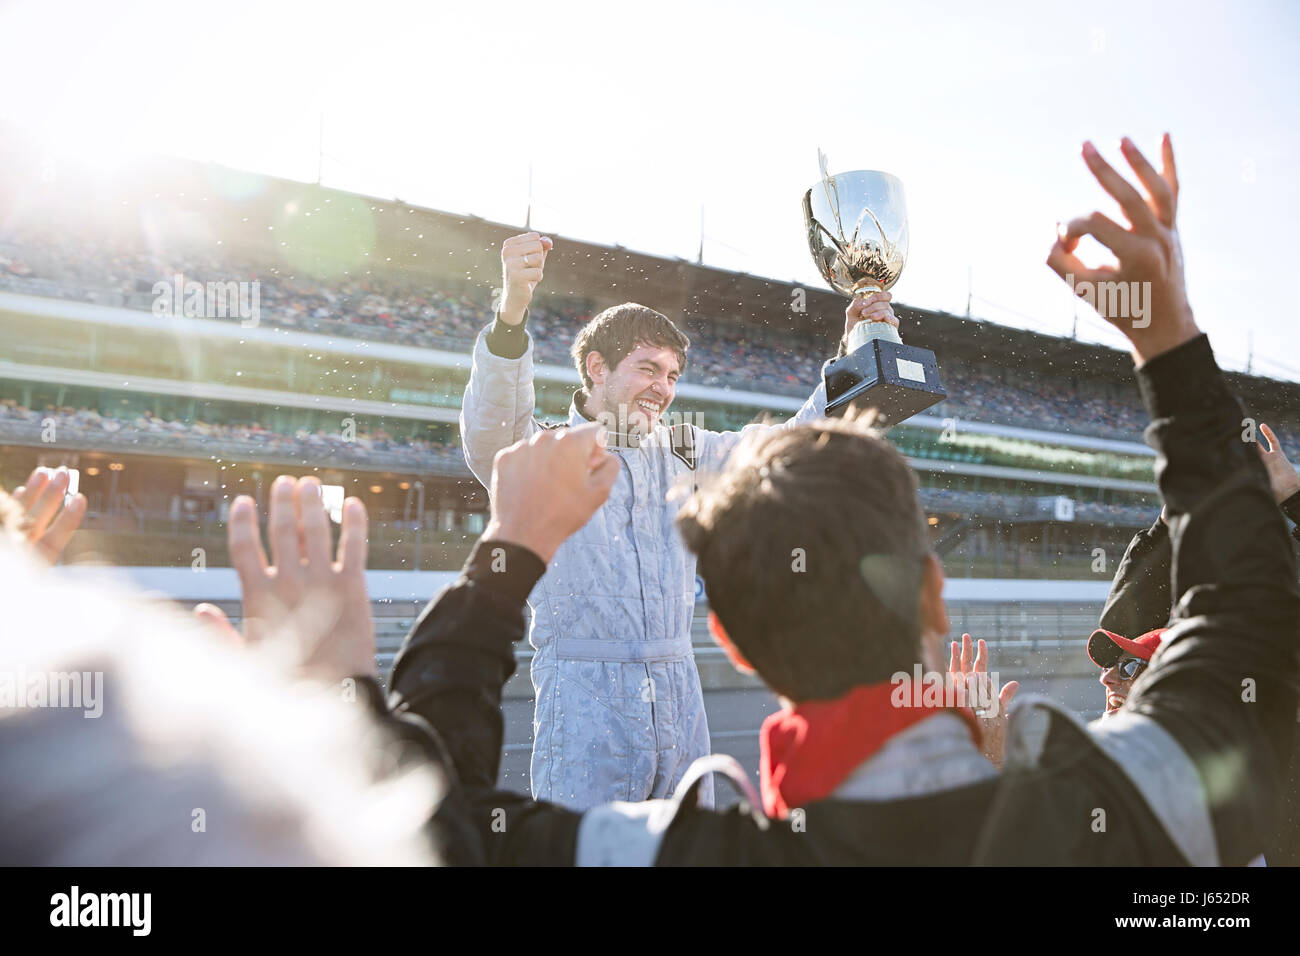 Formula one racing team cheering for driver with trophy, celebrating victory on sports track Stock Photo